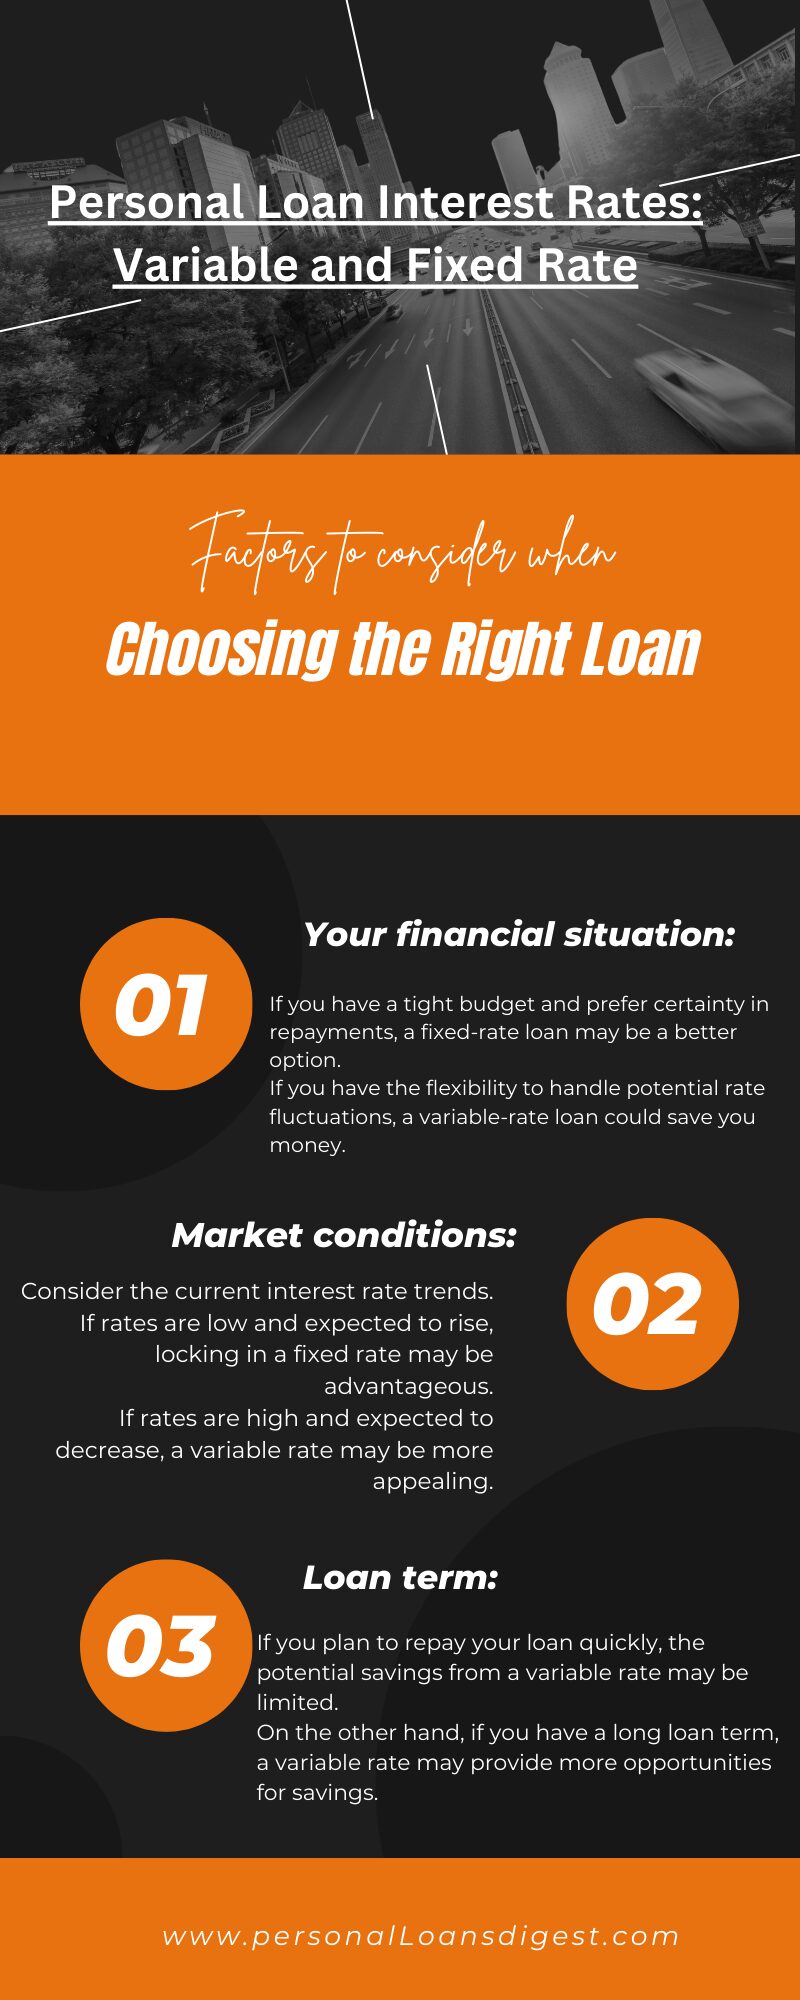 An infographic illustrating factors to consider when Choosing the Right Loan